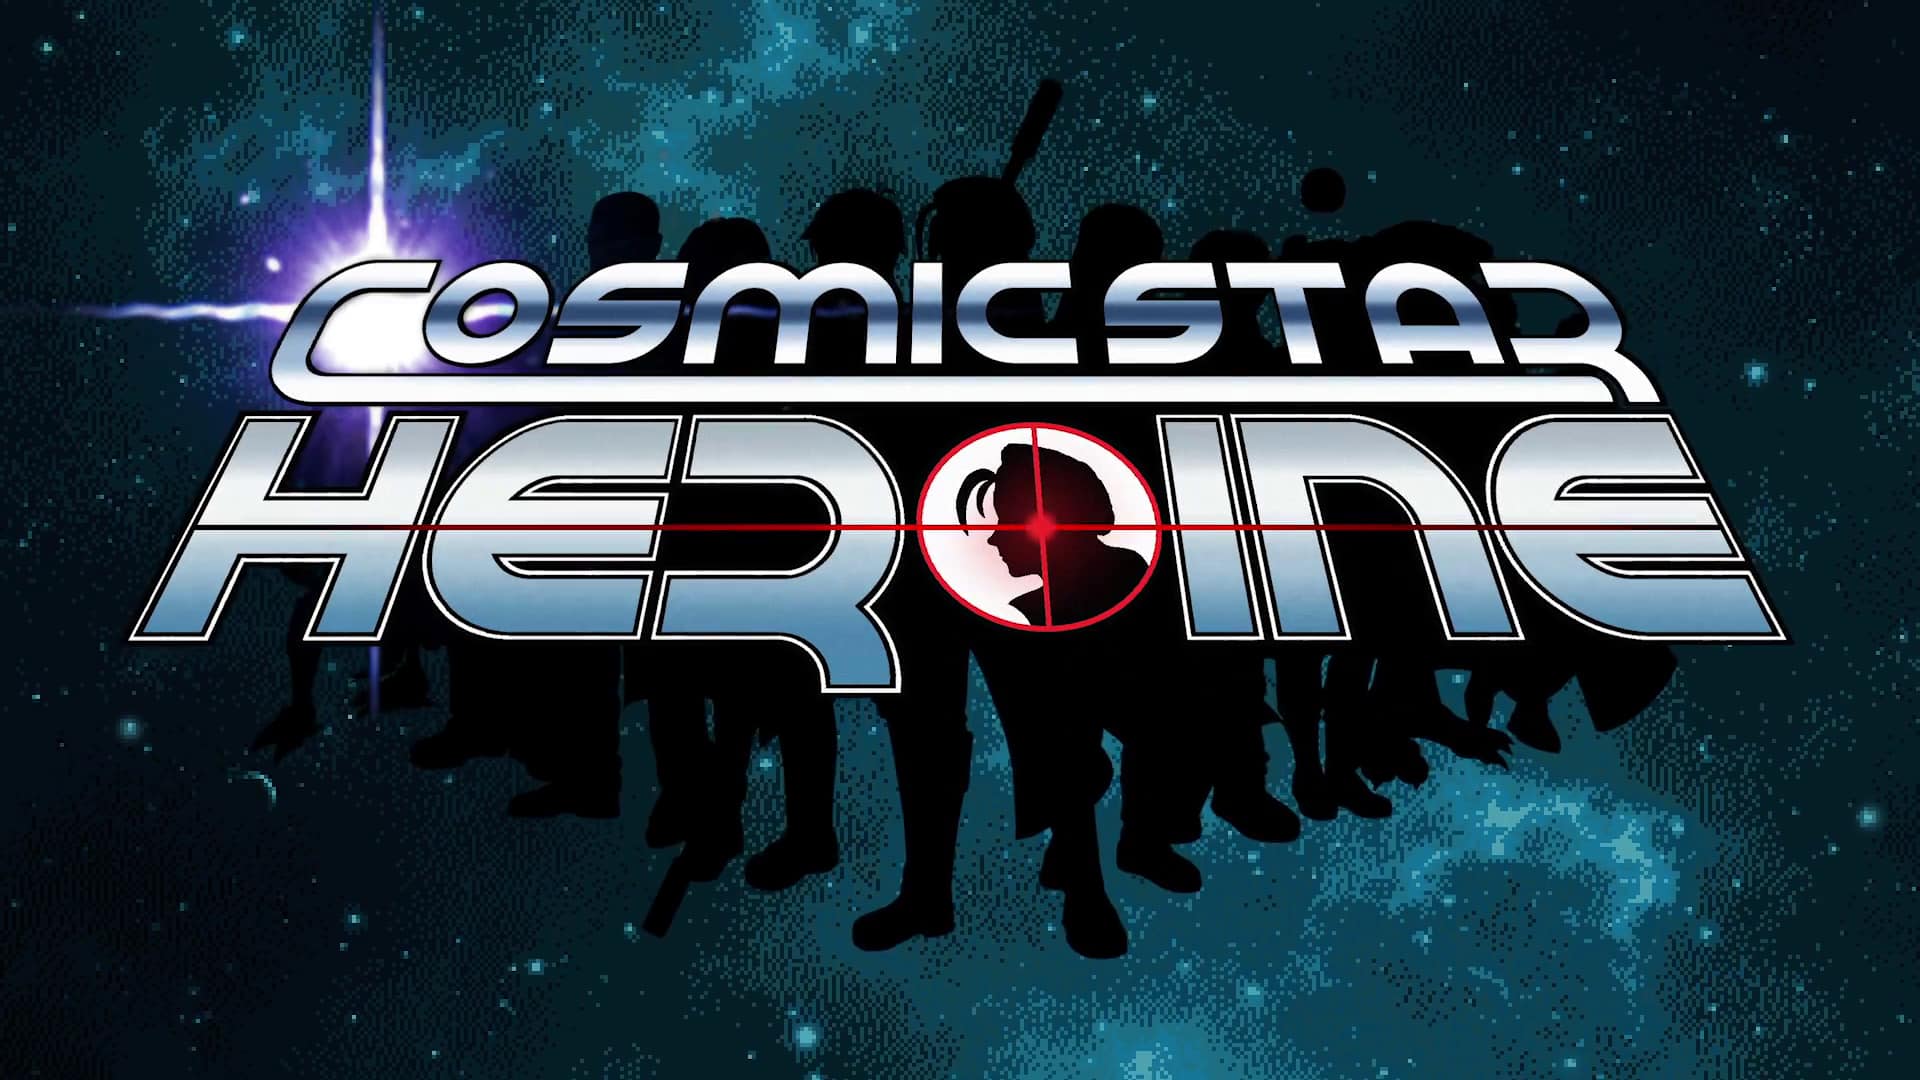 Cosmic Star Heroine Launches this Summer (PS4, PS Vita & PC) - 1920 x 1080 jpeg 1015kB